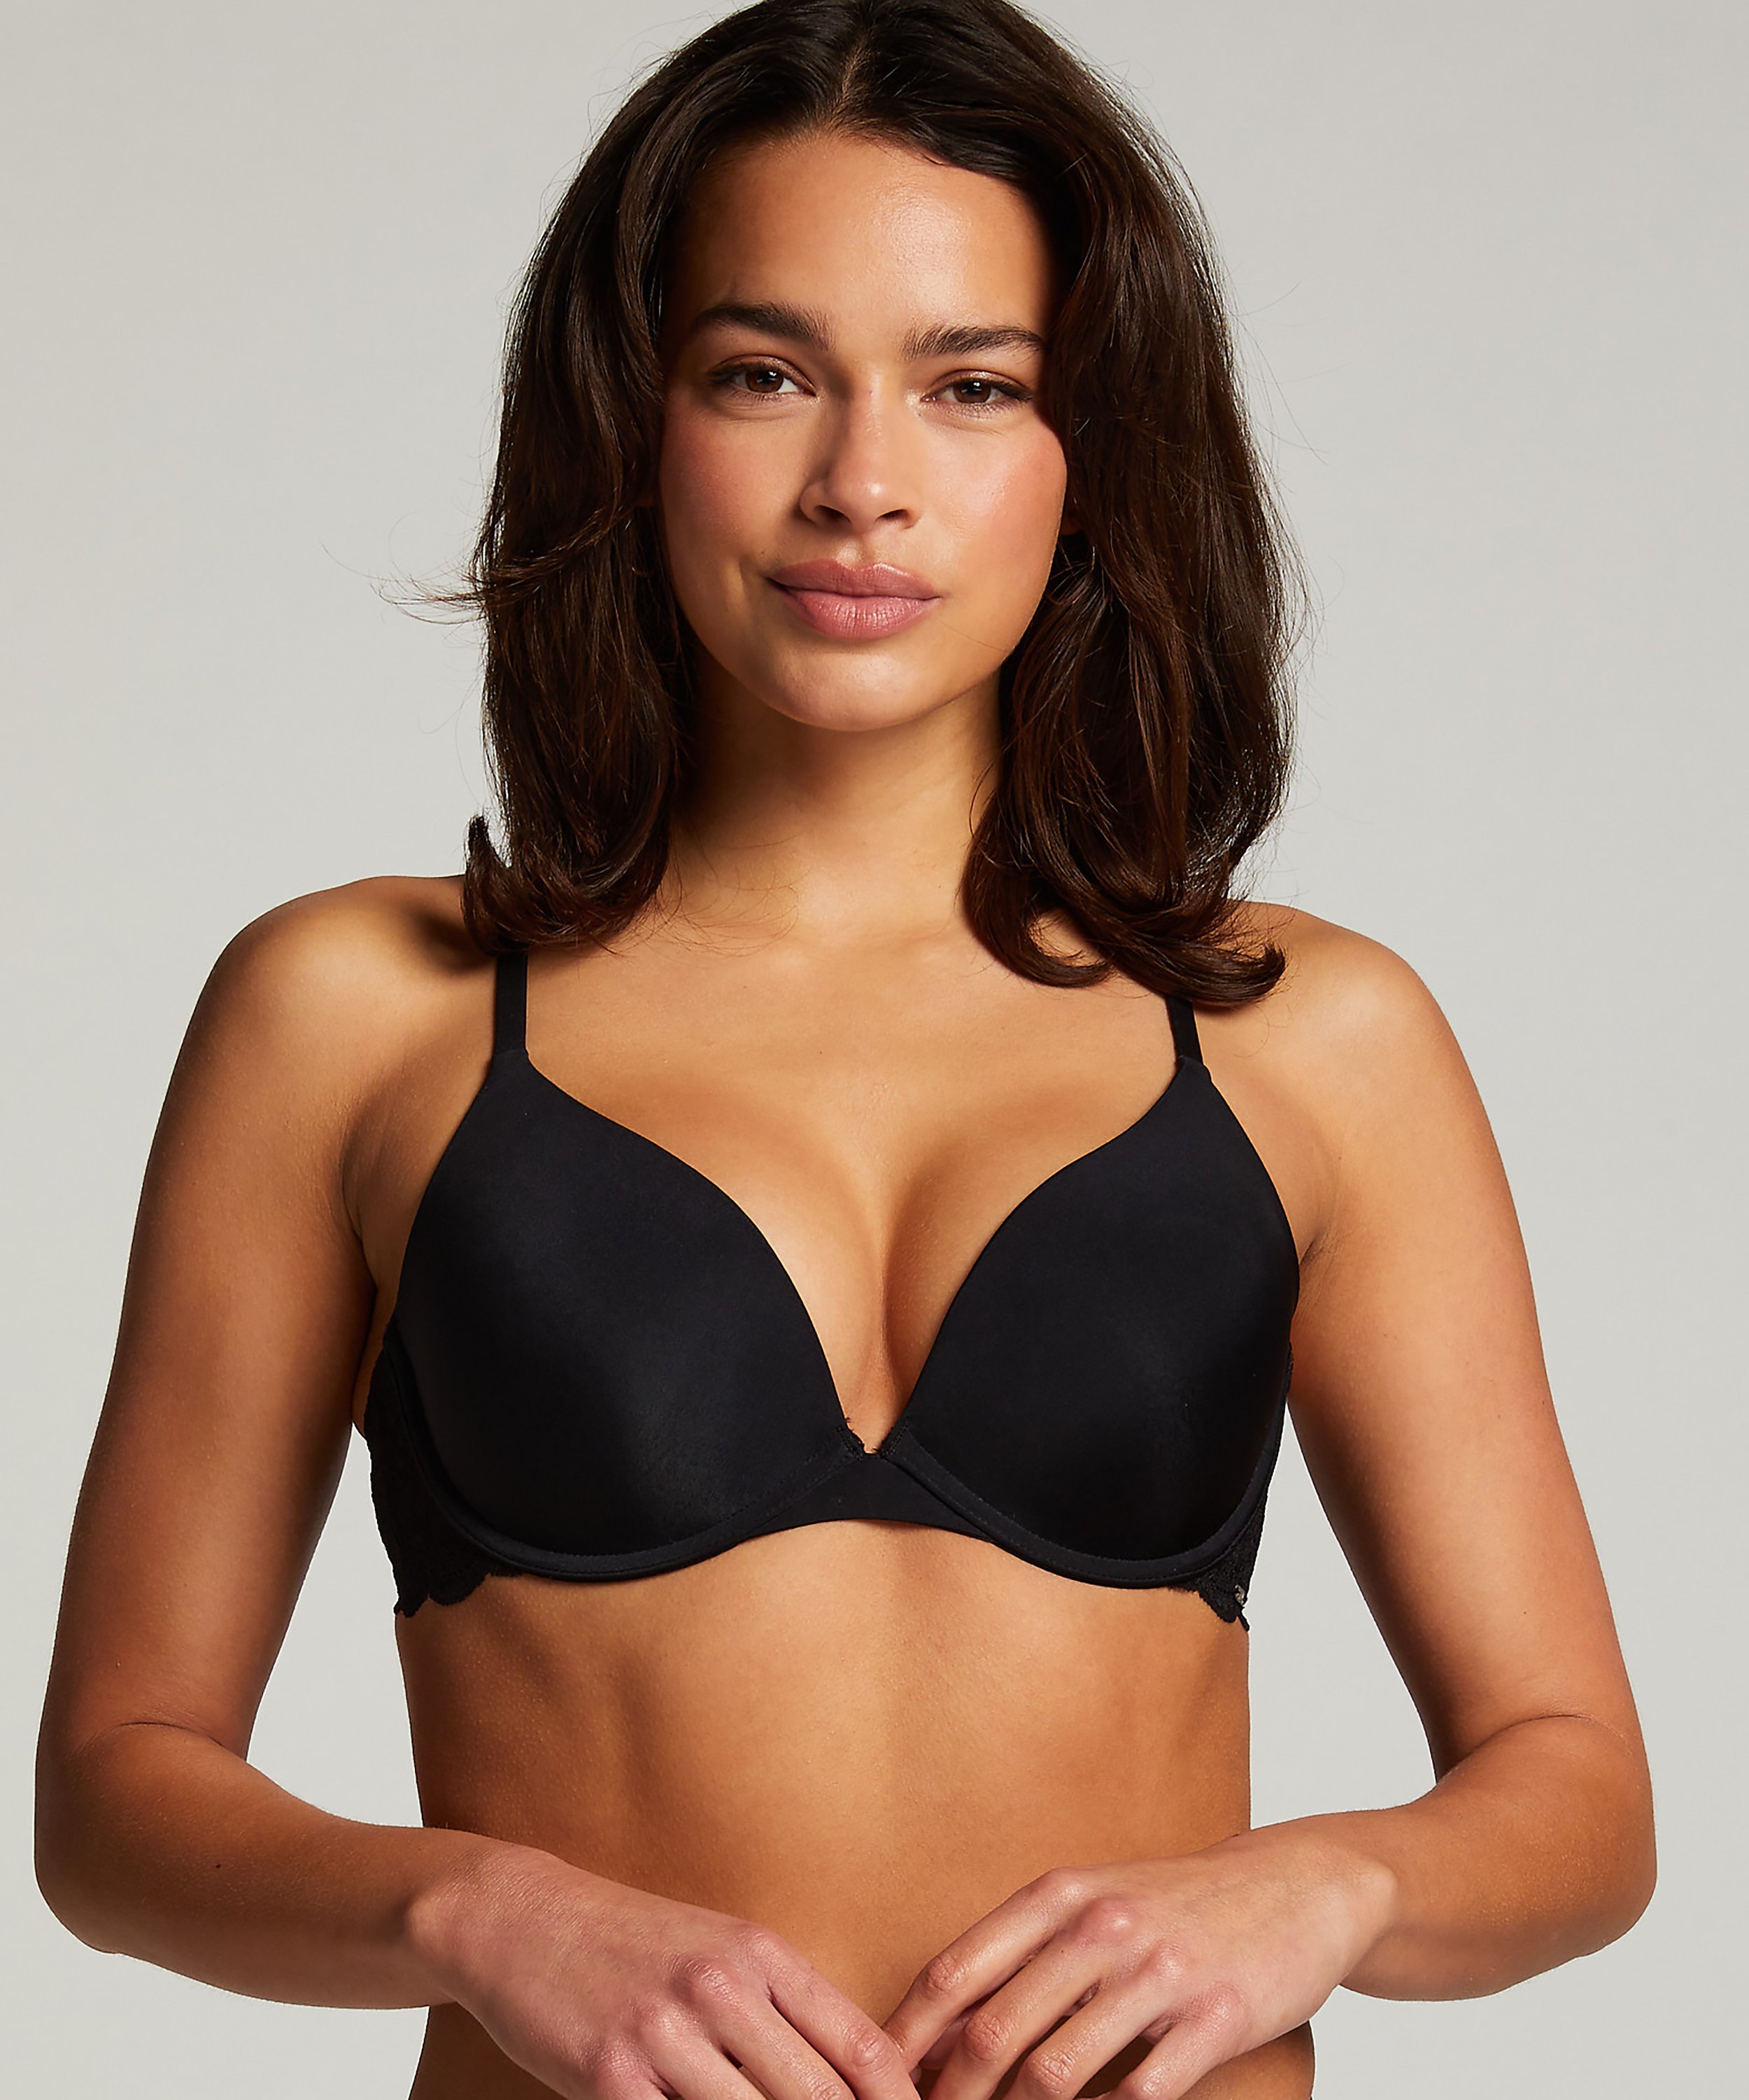 Angie Padded Underwired Push-Up Bra for £31 - Push-up Bras